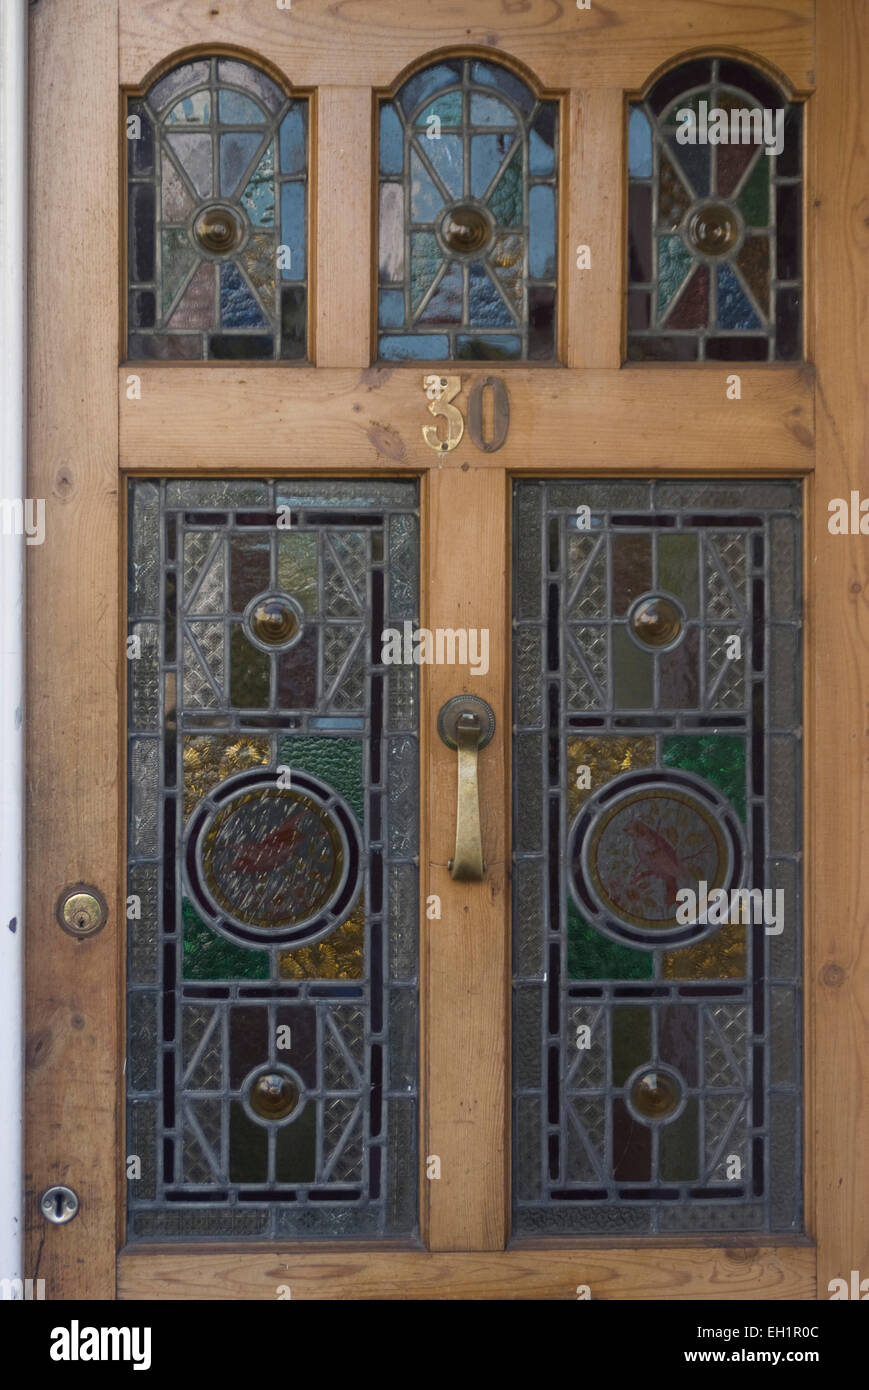 Stained glass inlays on a front door of a domestic house, Peckham, London, SE15, England Stock Photo